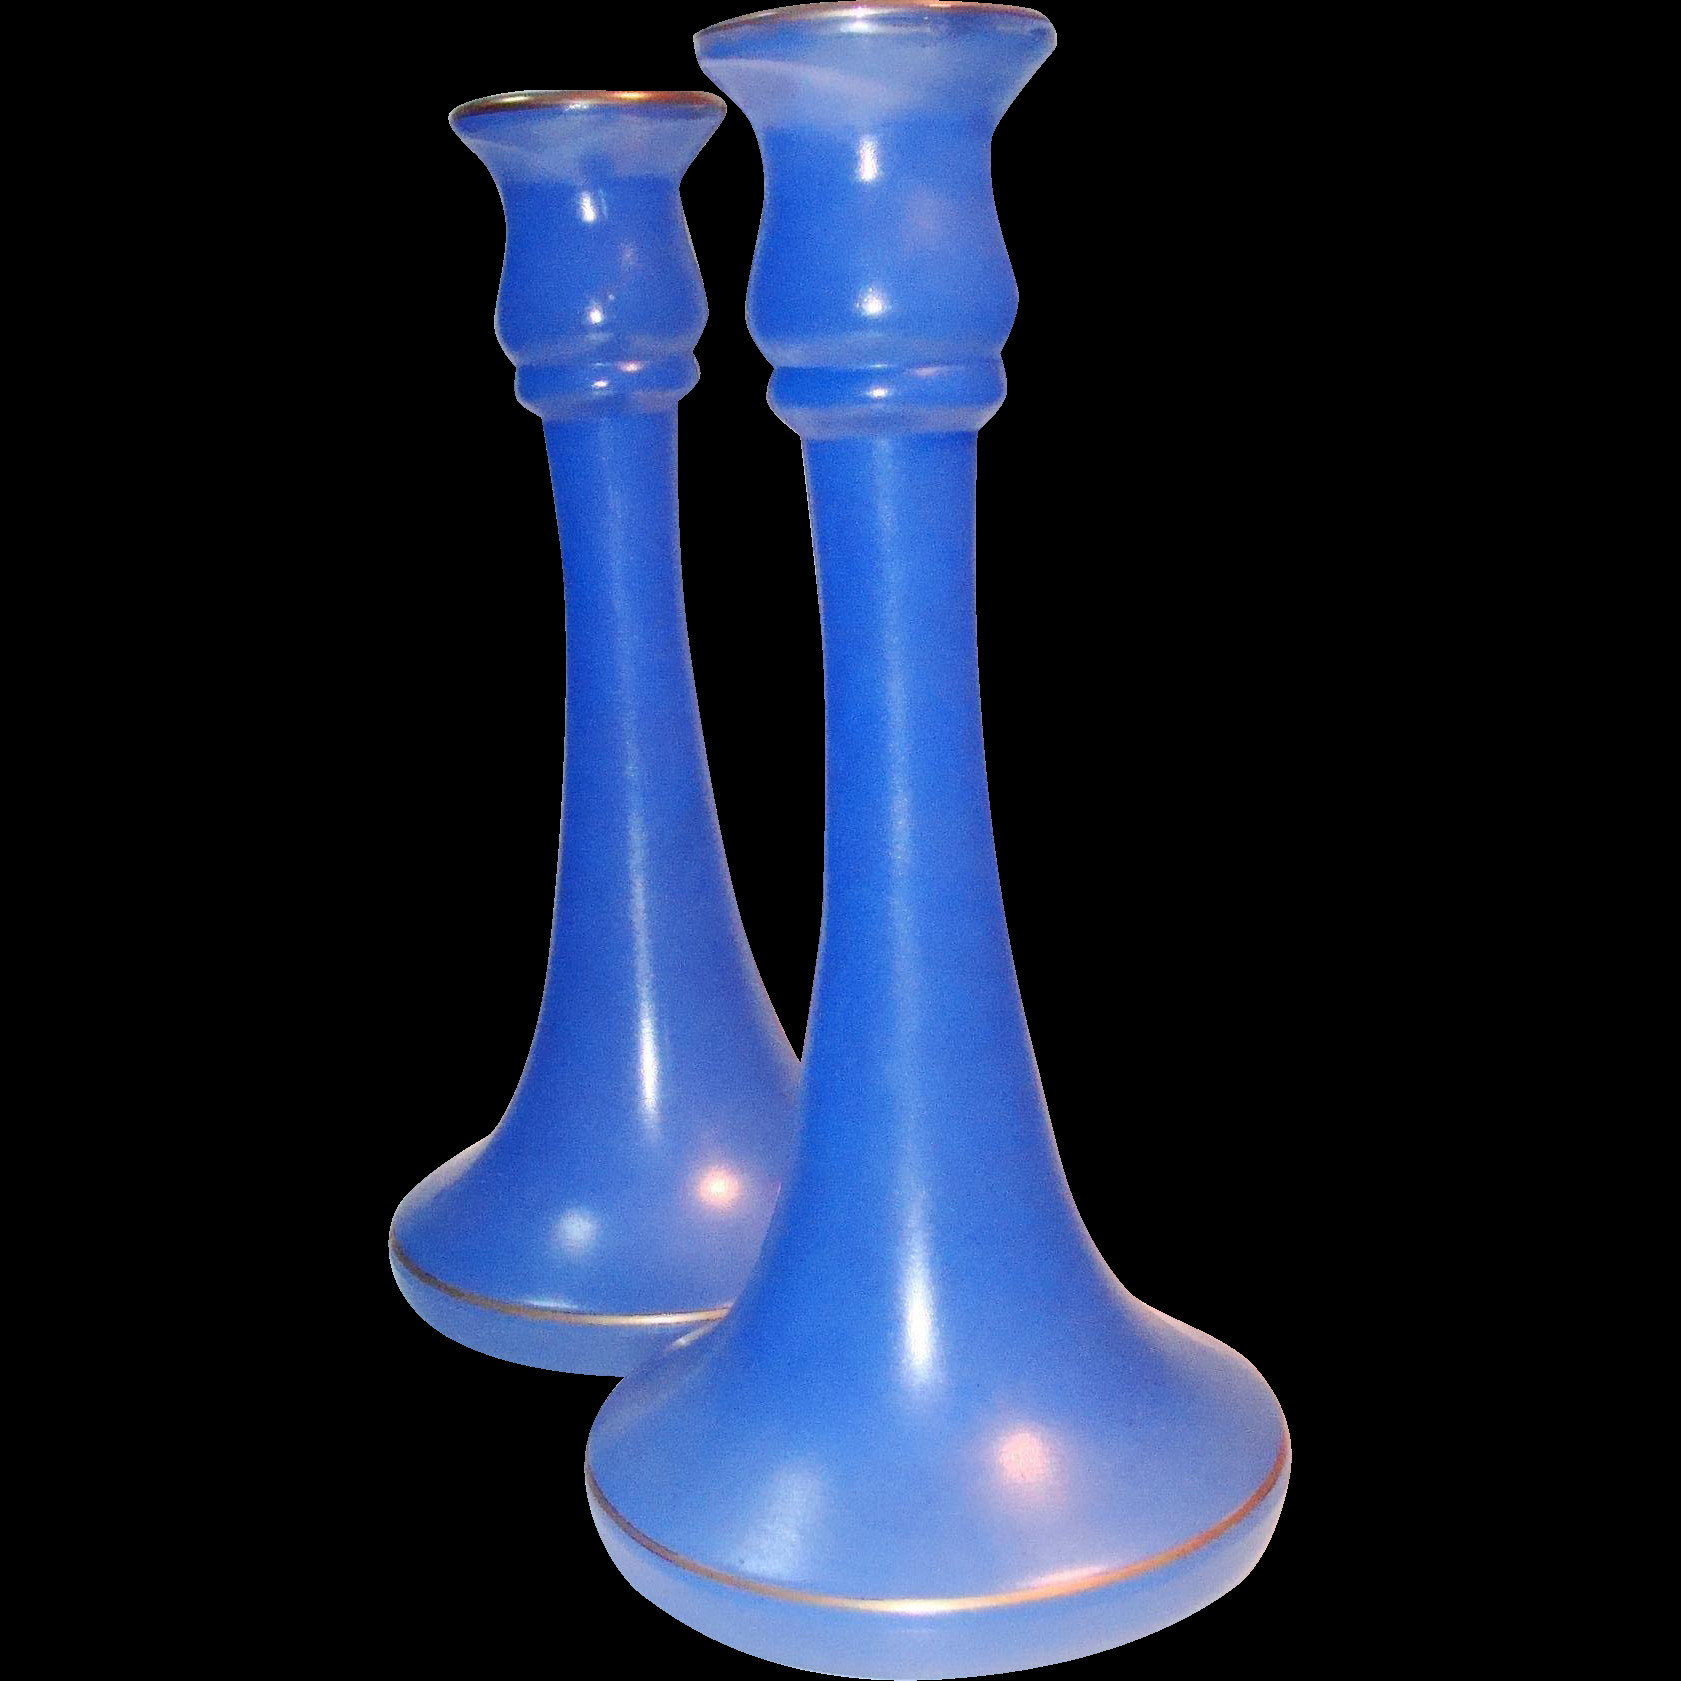 14 attractive Cobalt Blue Flower Vase 2024 free download cobalt blue flower vase of cool blue frosted glass candlesticks pair 9 tall inside cool blue glass candlesticks a pair to use on your table to make you at least feel cool in summer